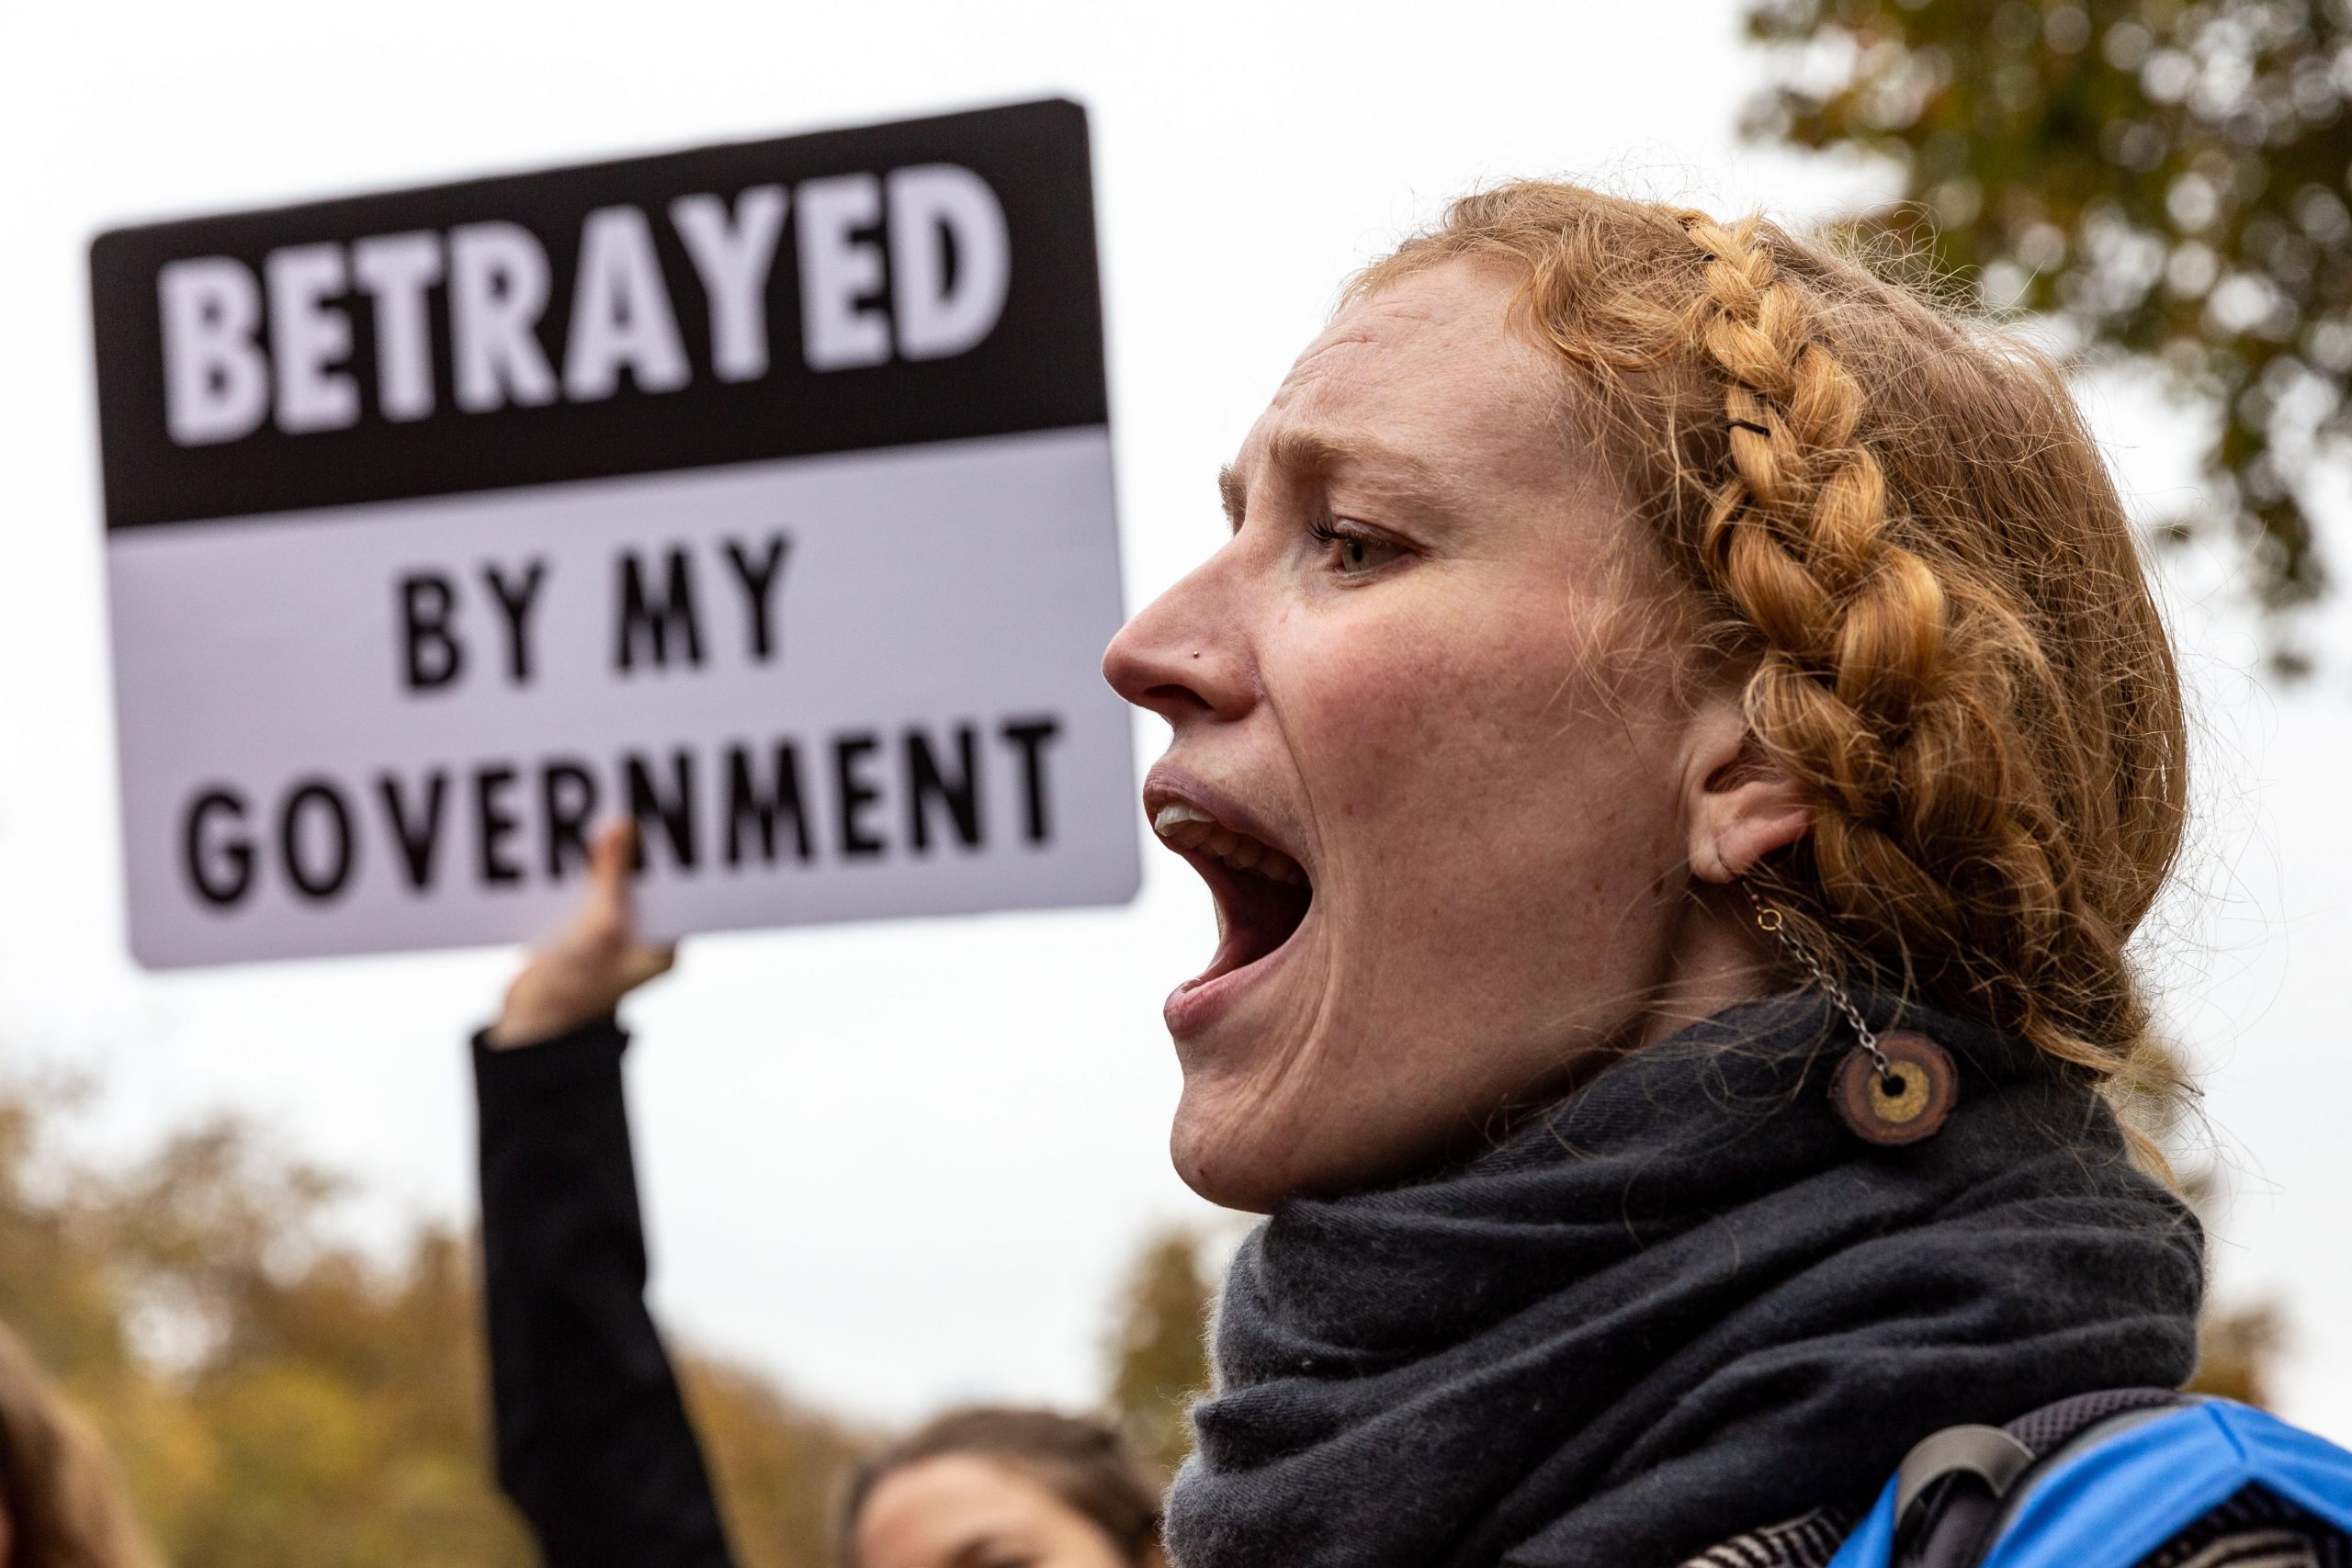 A person protesting with a sign reading "betrayed by the government" in the background